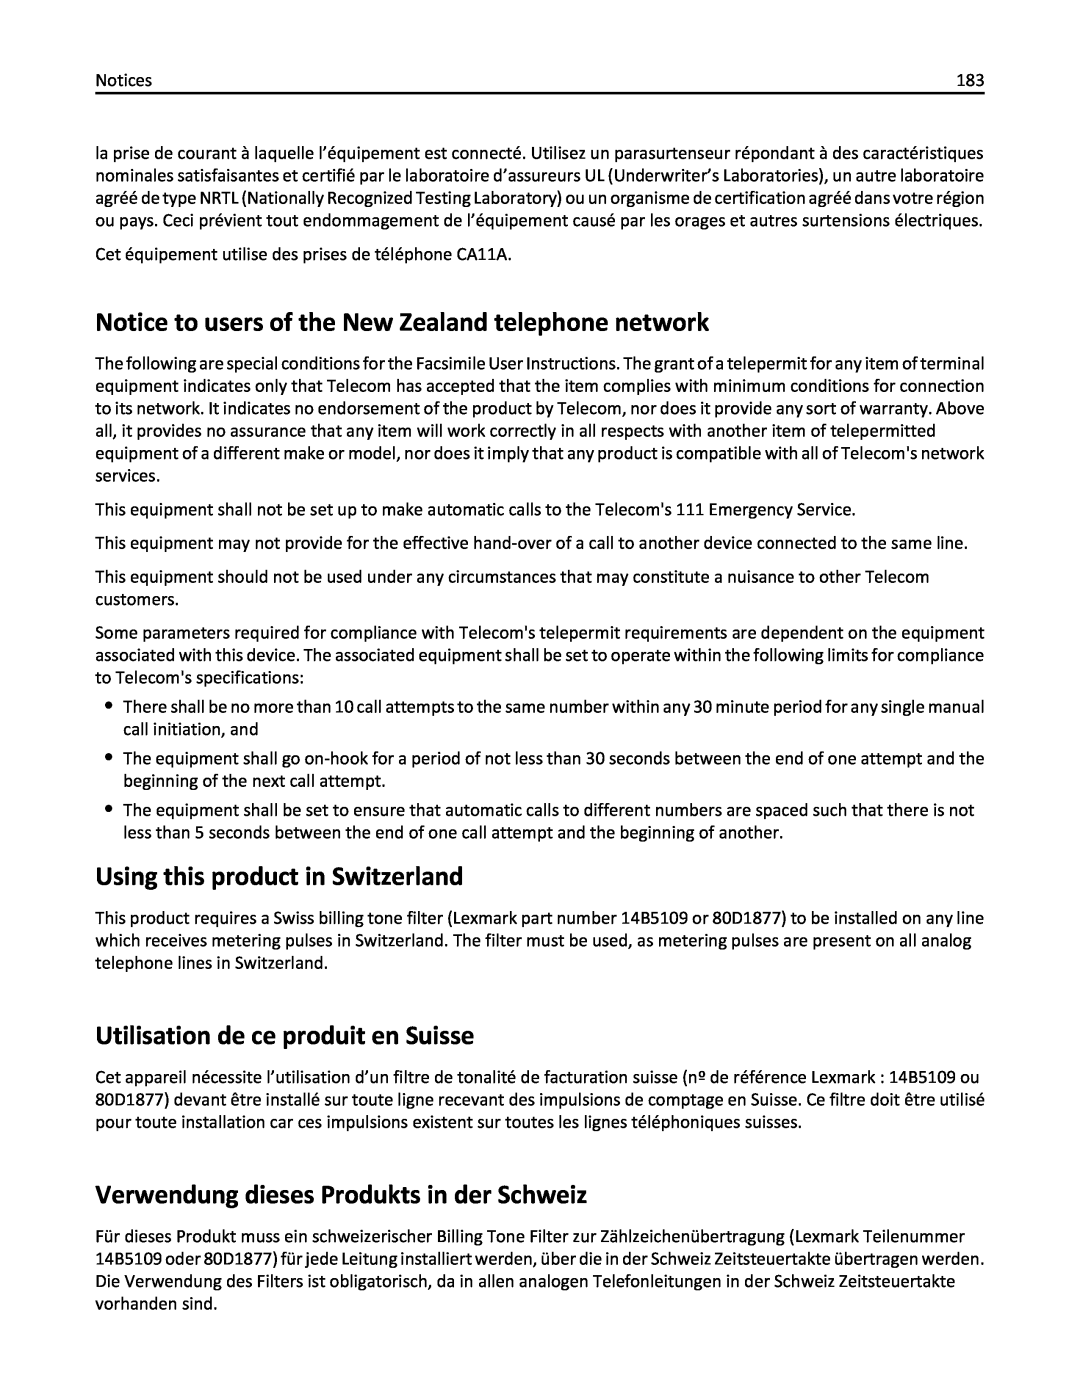 Lexmark PRO4000C, 90P3000 manual Notice to users of the New Zealand telephone network, Using this product in Switzerland 